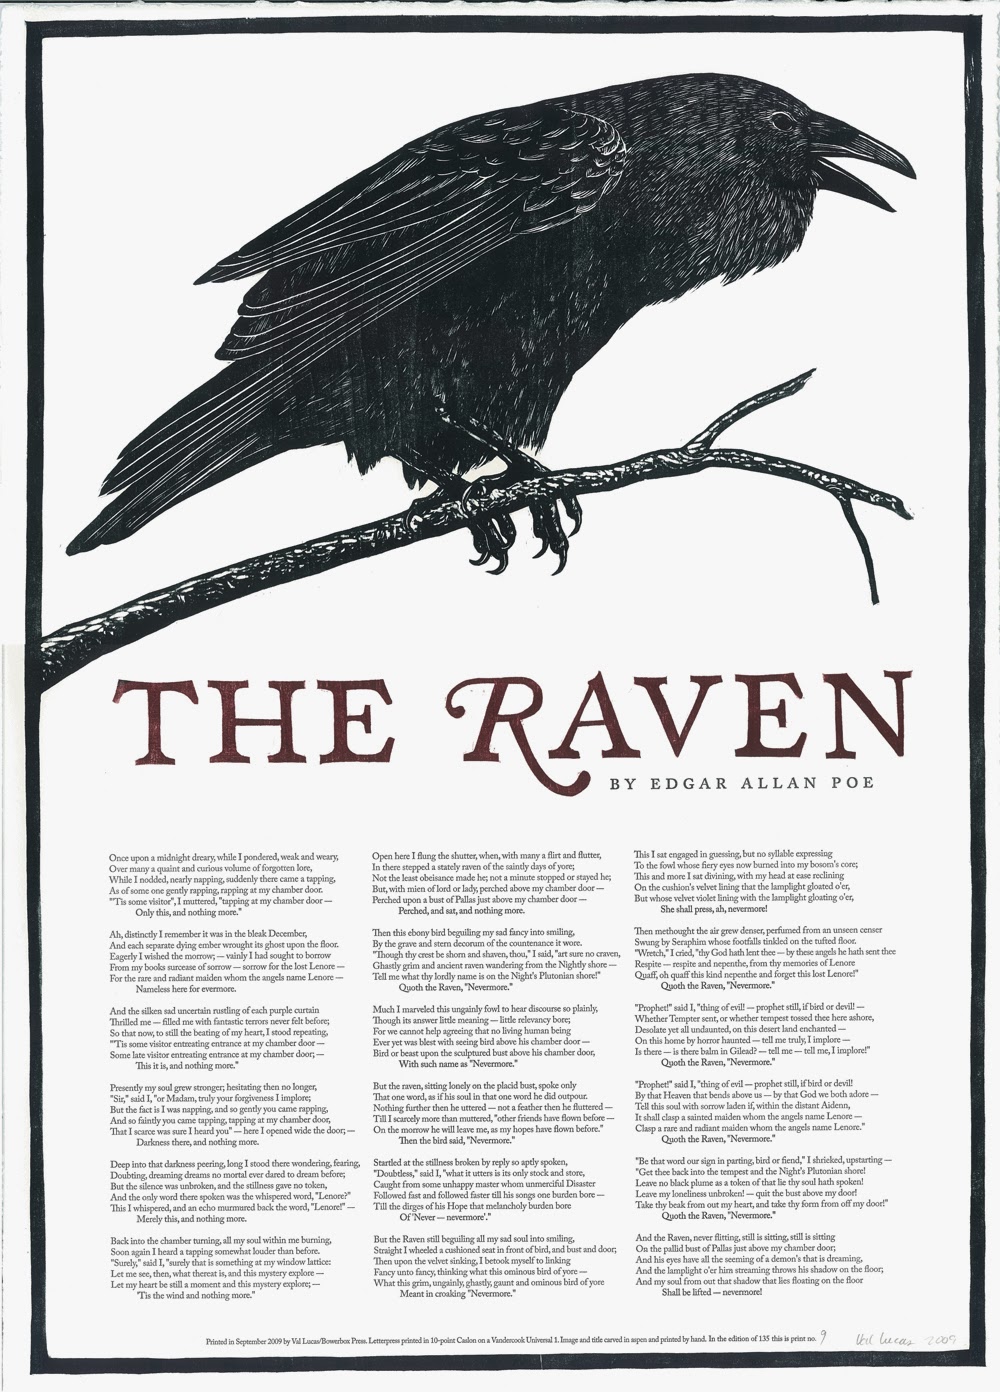 Free Literary Books for the Kindle (US & UK): The Raven - by Edgar